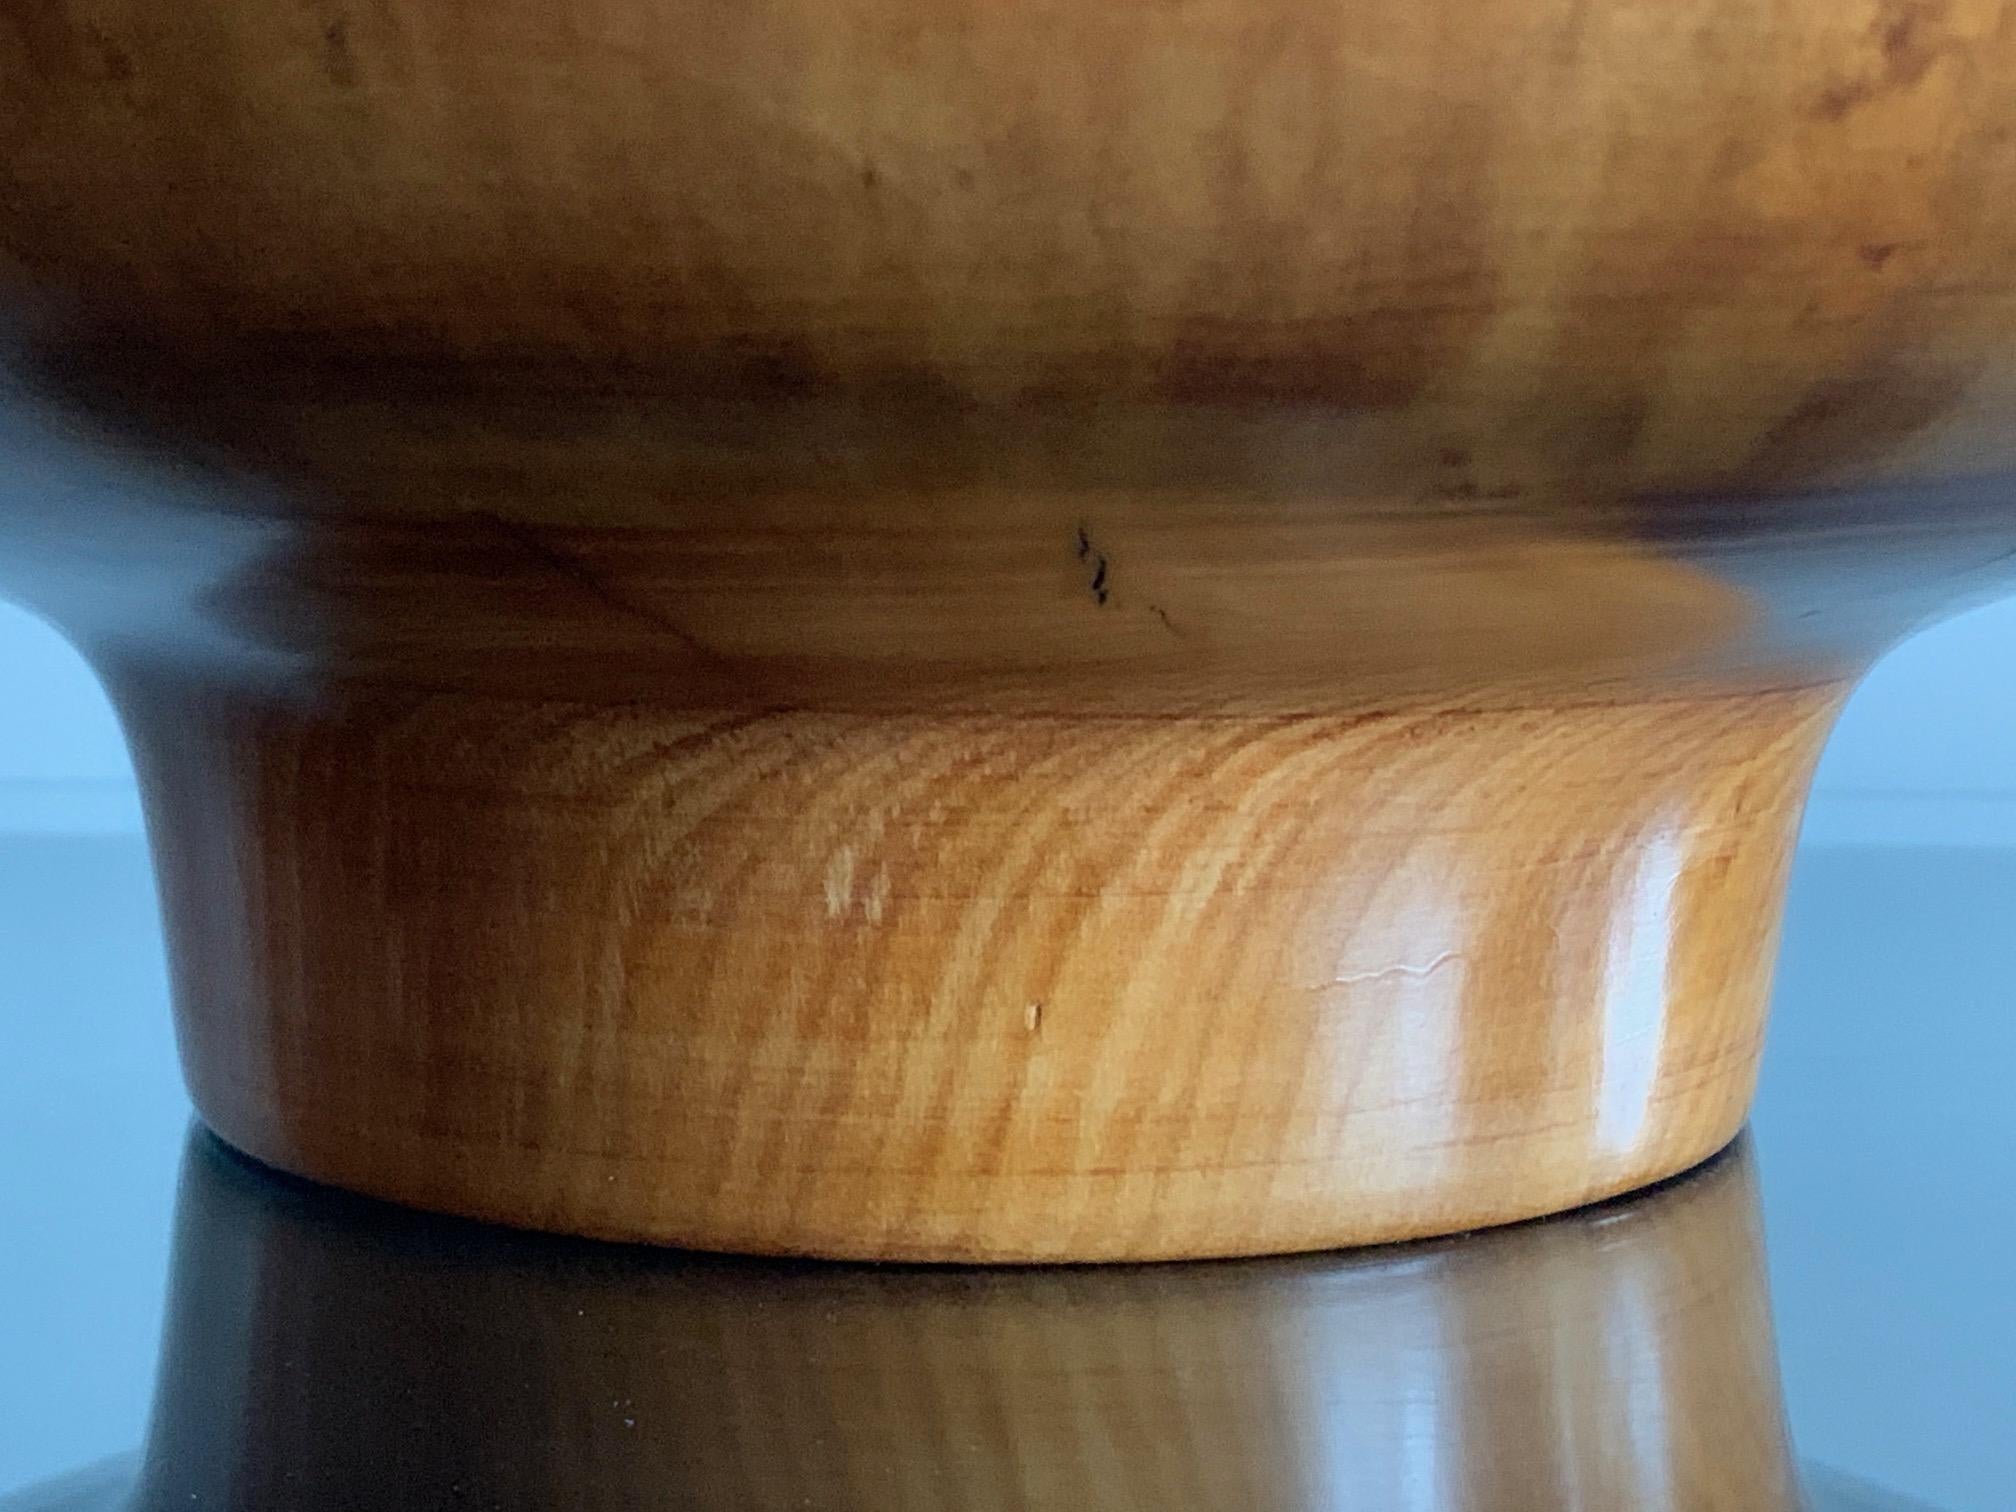 A unique and rare turned bowl by Ed Moulthrop. Made of figured tulipwood and finished in reflective gloss the bowl has great presence and an aura of mystery. Ed Moulthrop is a master at letting the wood reveal it's character and speak for itself.